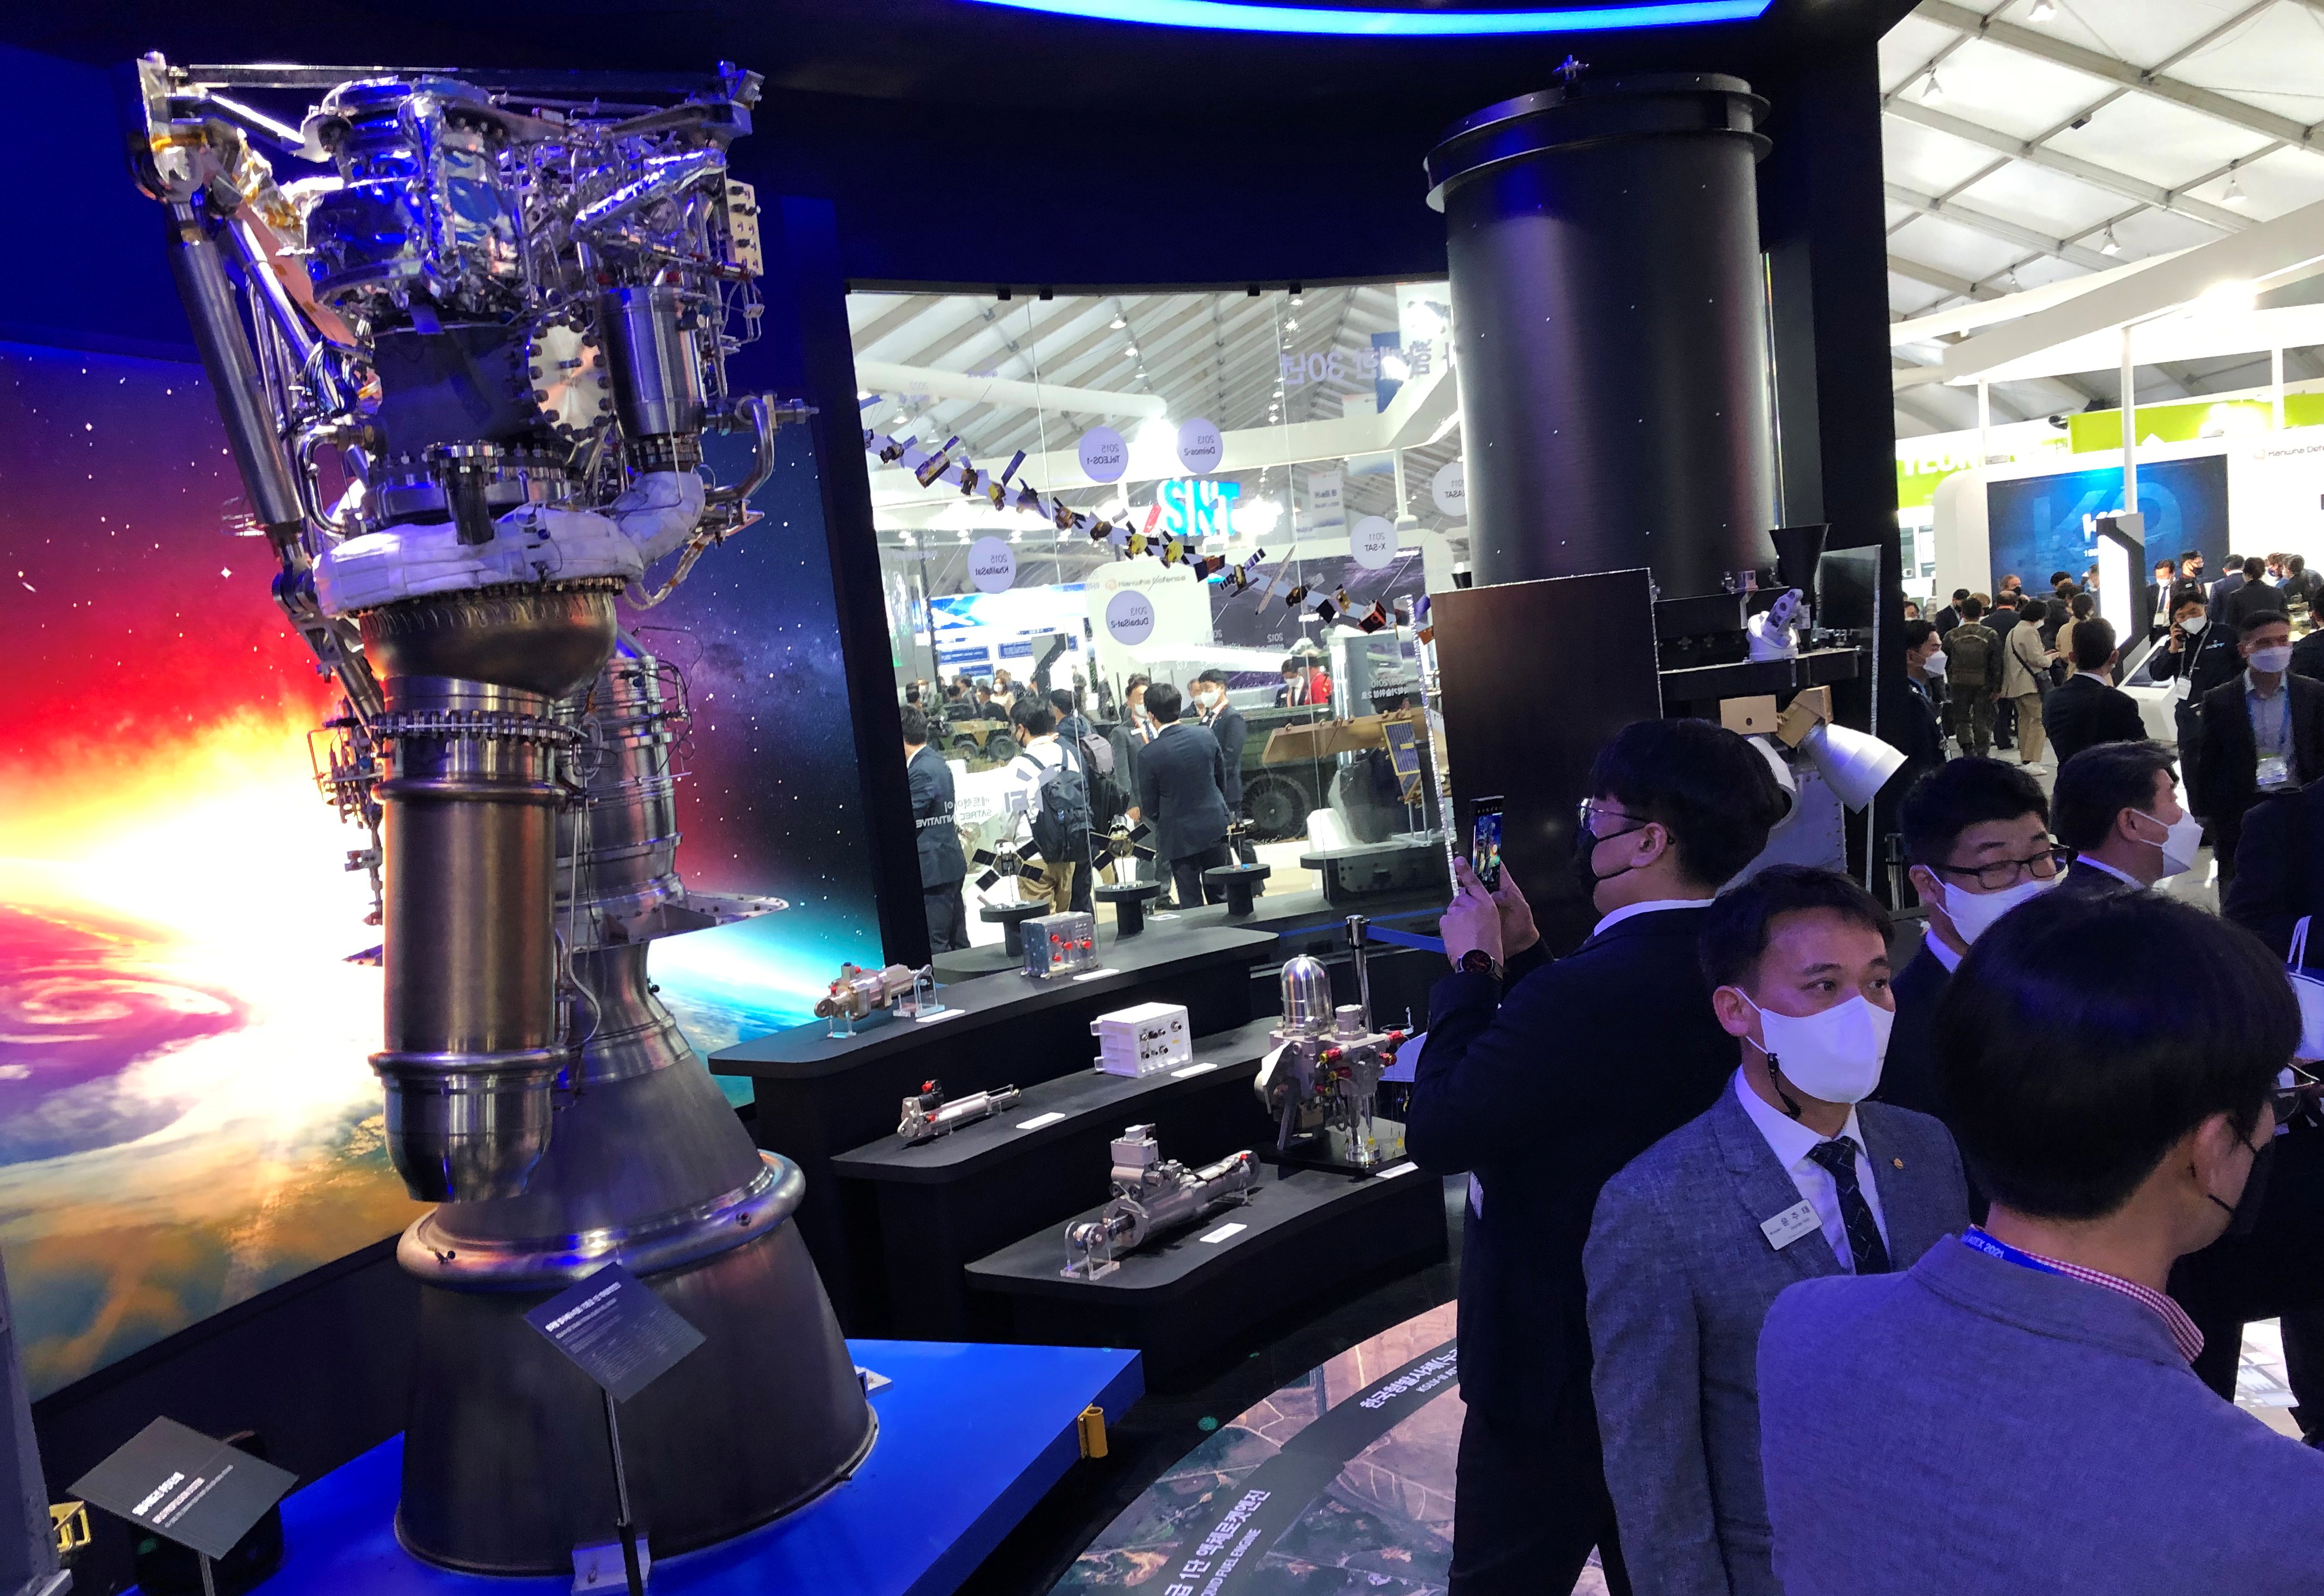 Participants looks at a display of rocket engines and other components manufactured by Hanwha during the Seoul International Aerospace and Defense Exhibition (ADEX), in Seongnam, South Korea, October 20, 2021. REUTERS/Josh Smith